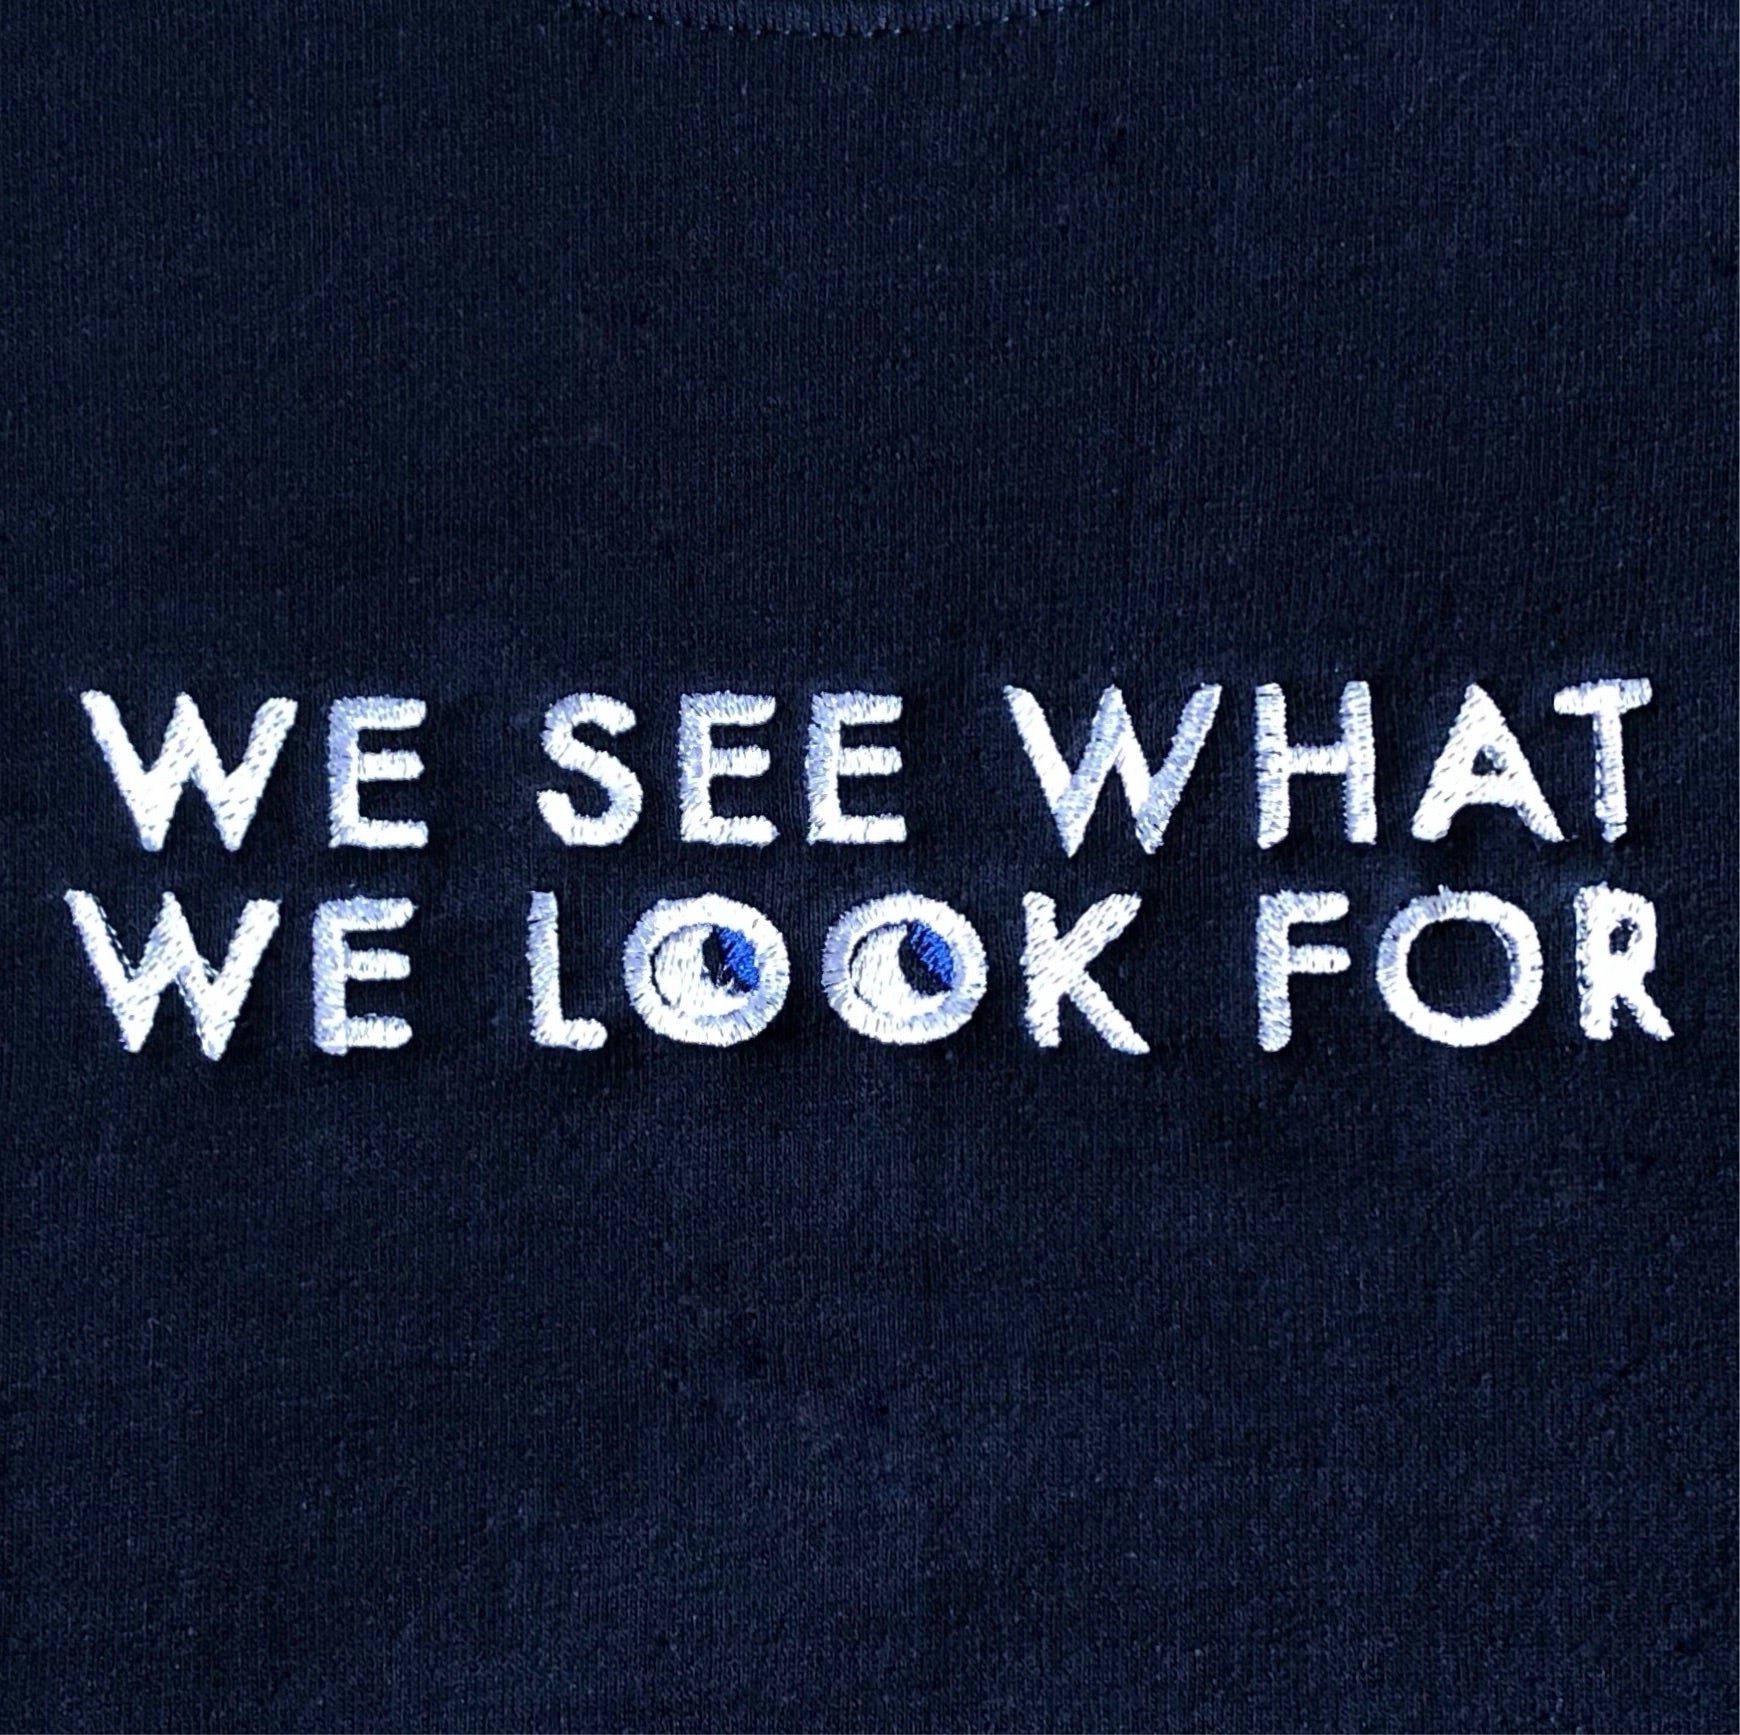 We See What We Look For Crewneck